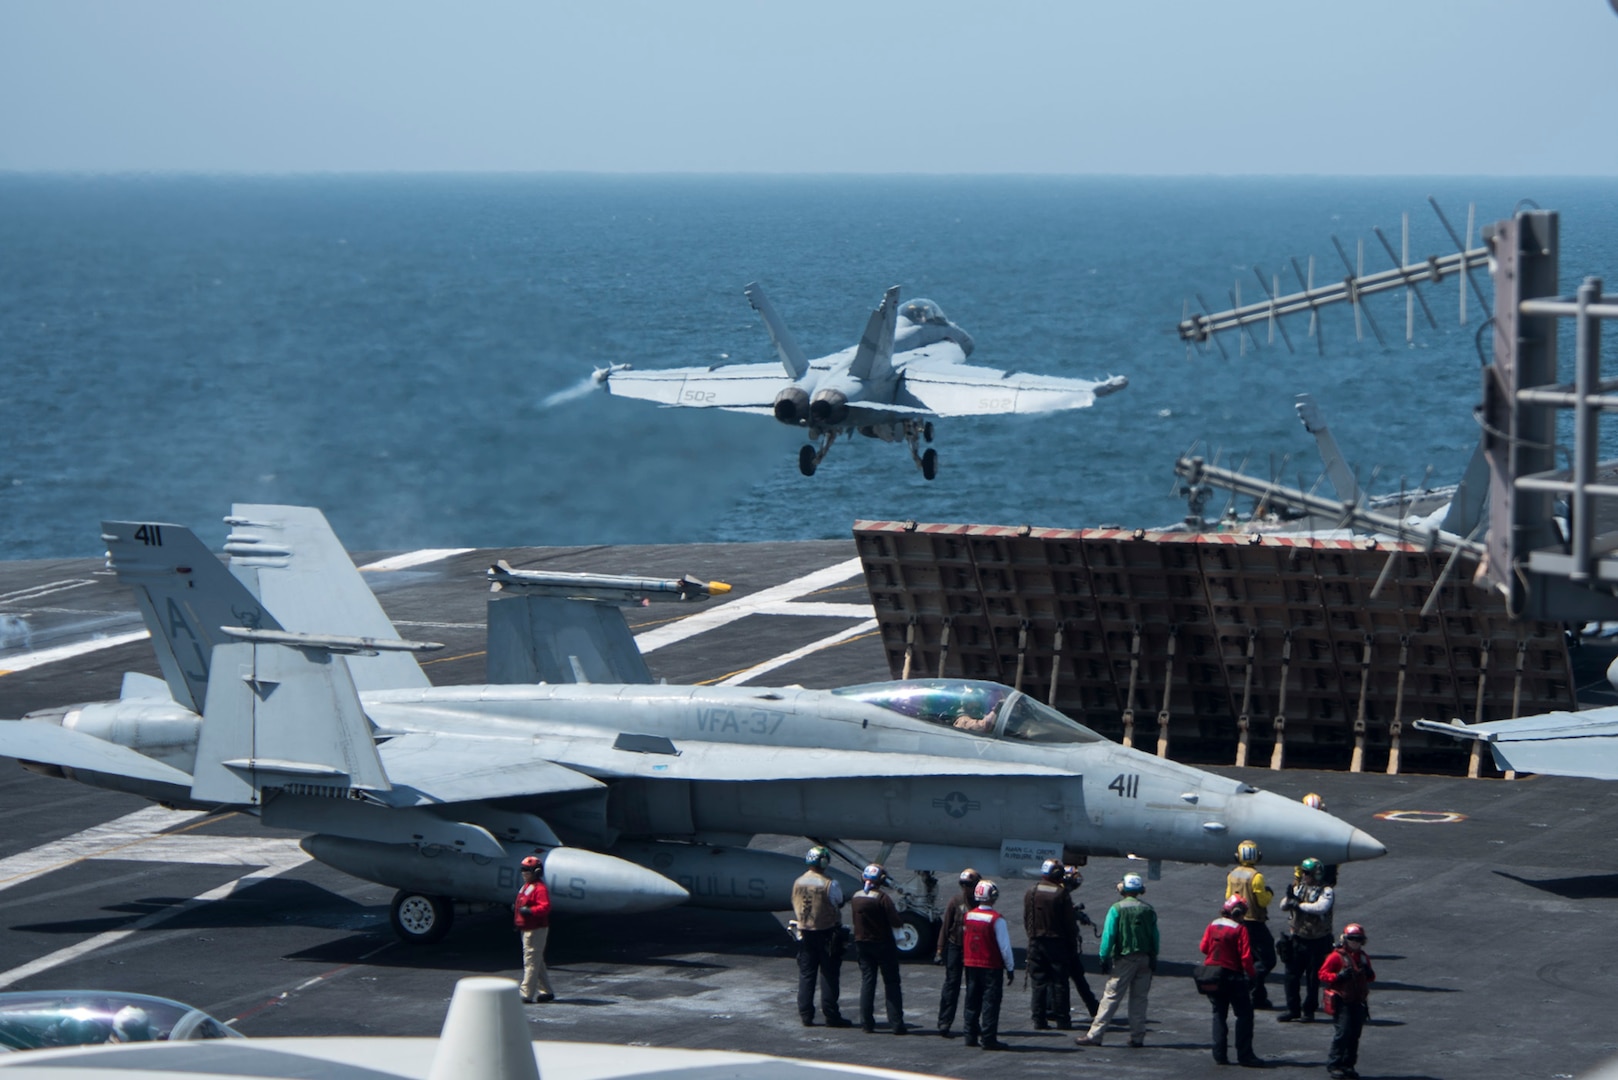 170318-N-YL257-006 
U.S. 5TH FLEET AREA OF OPERATIONS (March 18, 2017) An EA-18G Growler attached to the "Lancers" of Electronic Attack Squadron (VAQ) 131 launches from the flight deck of the aircraft carrier USS George H.W. Bush (CVN 77). The carrier is part of the George H.W. Bush Carrier Strike Group and is deployed in support of maritime security operations and theater security cooperation efforts in the U.S. 5th Fleet area of operations. (U.S. Navy photo by Mass Communication Specialist 3rd Class Christopher Gaines/Released)